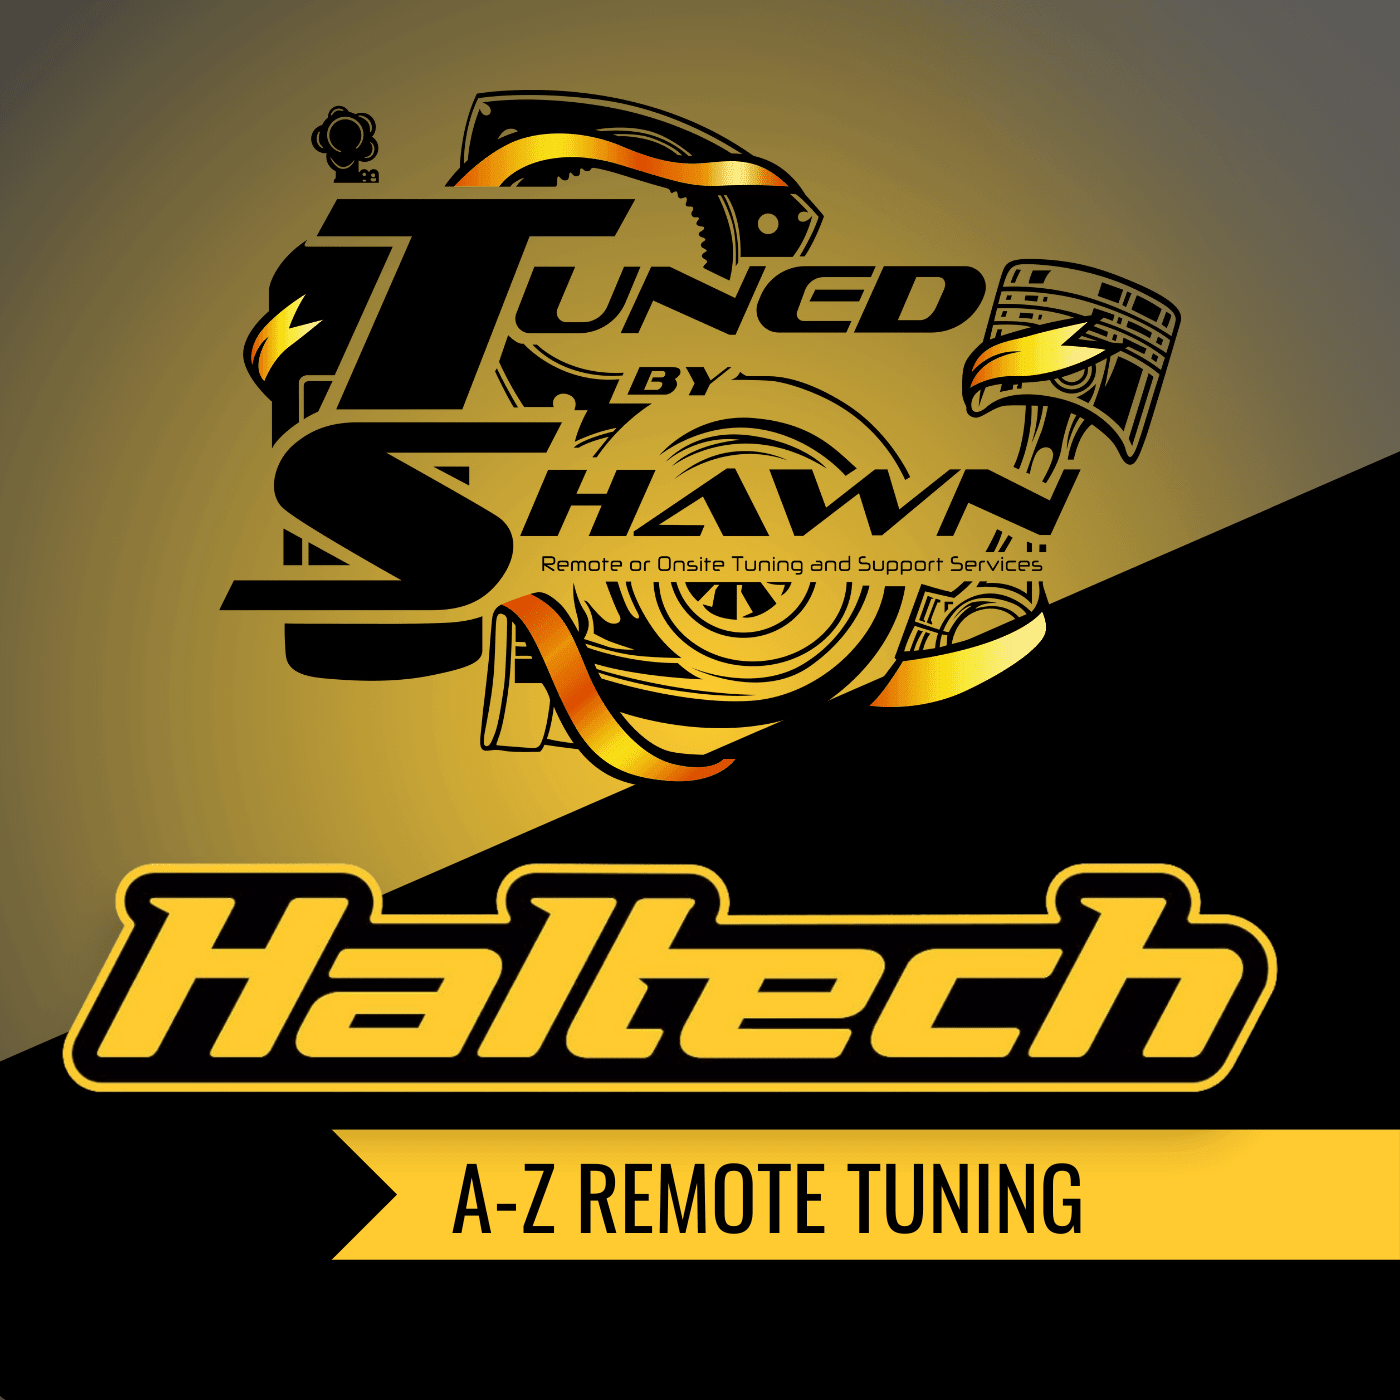 Haltech remote ecu tuning full a to z tuning service with remote dyno tuning from tuned by shawn